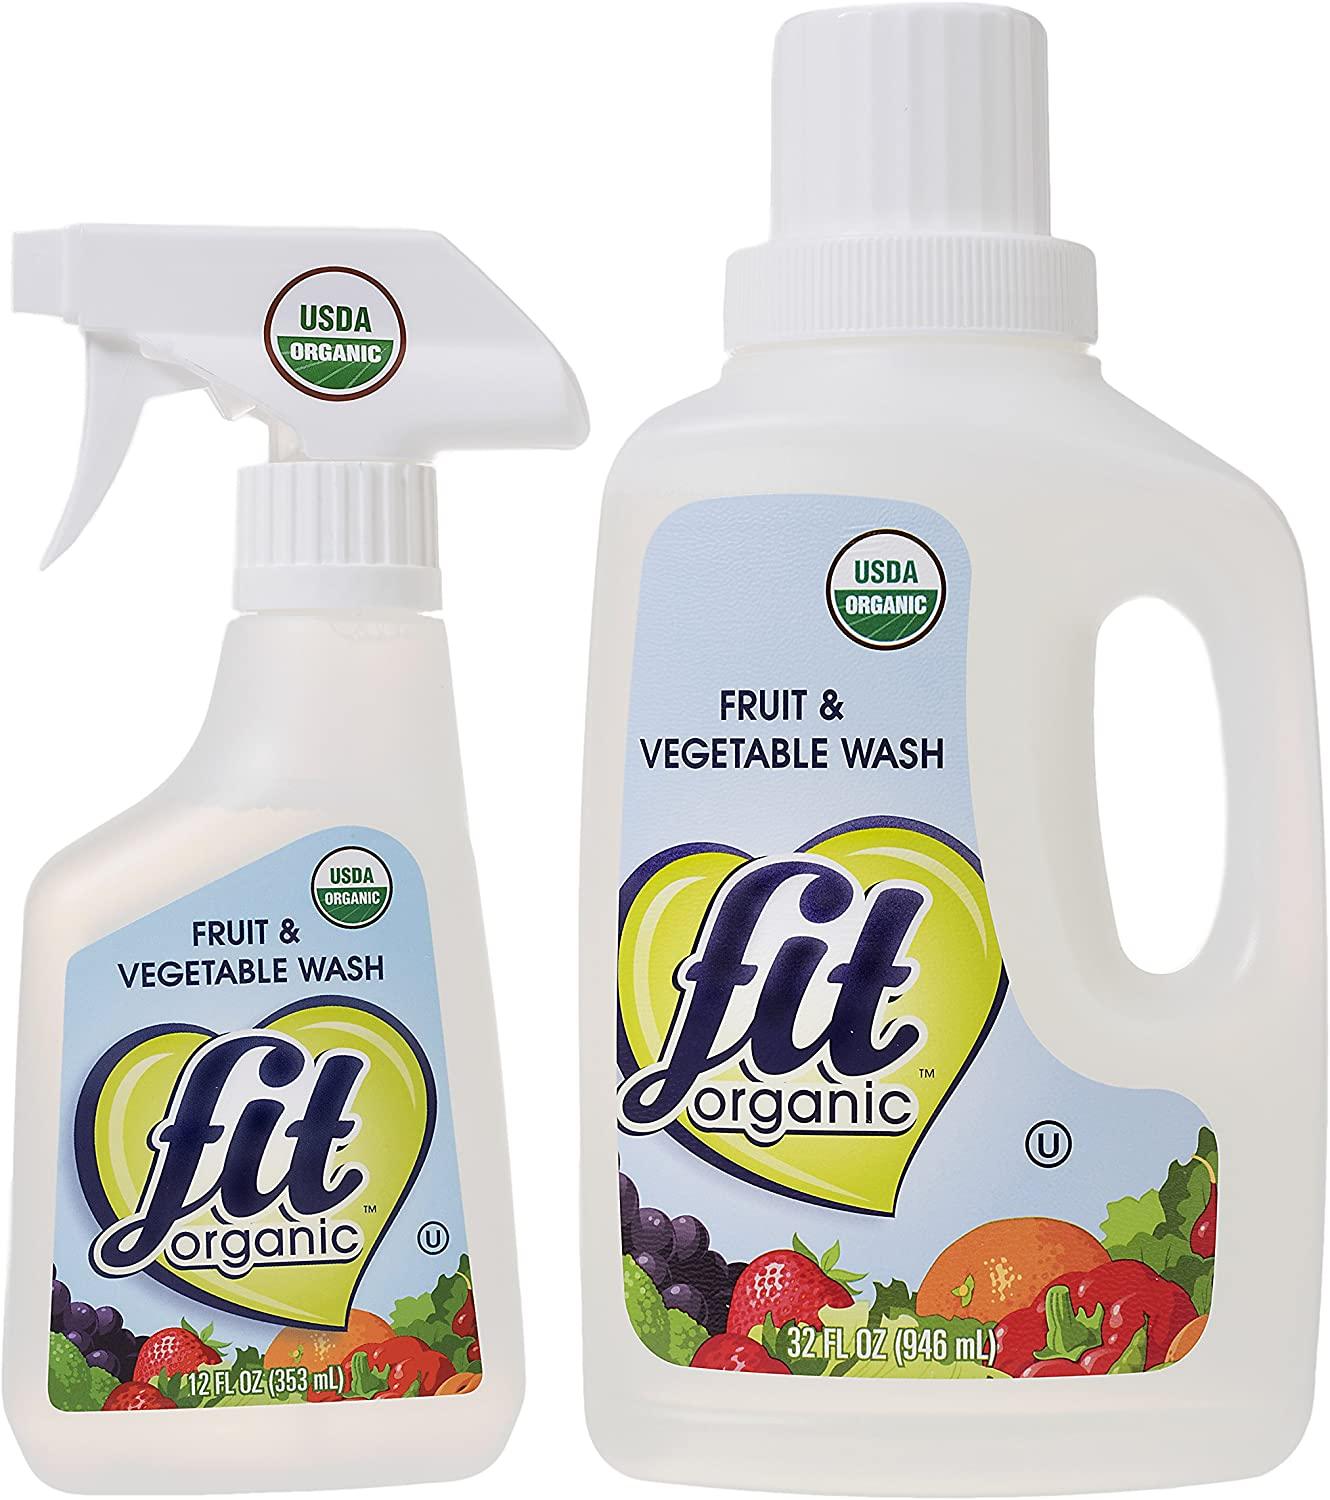 How to wash & remove pesticides from fruits & veggies - Veggie Wash, TJ's  Fruits and Vegetable Wash 